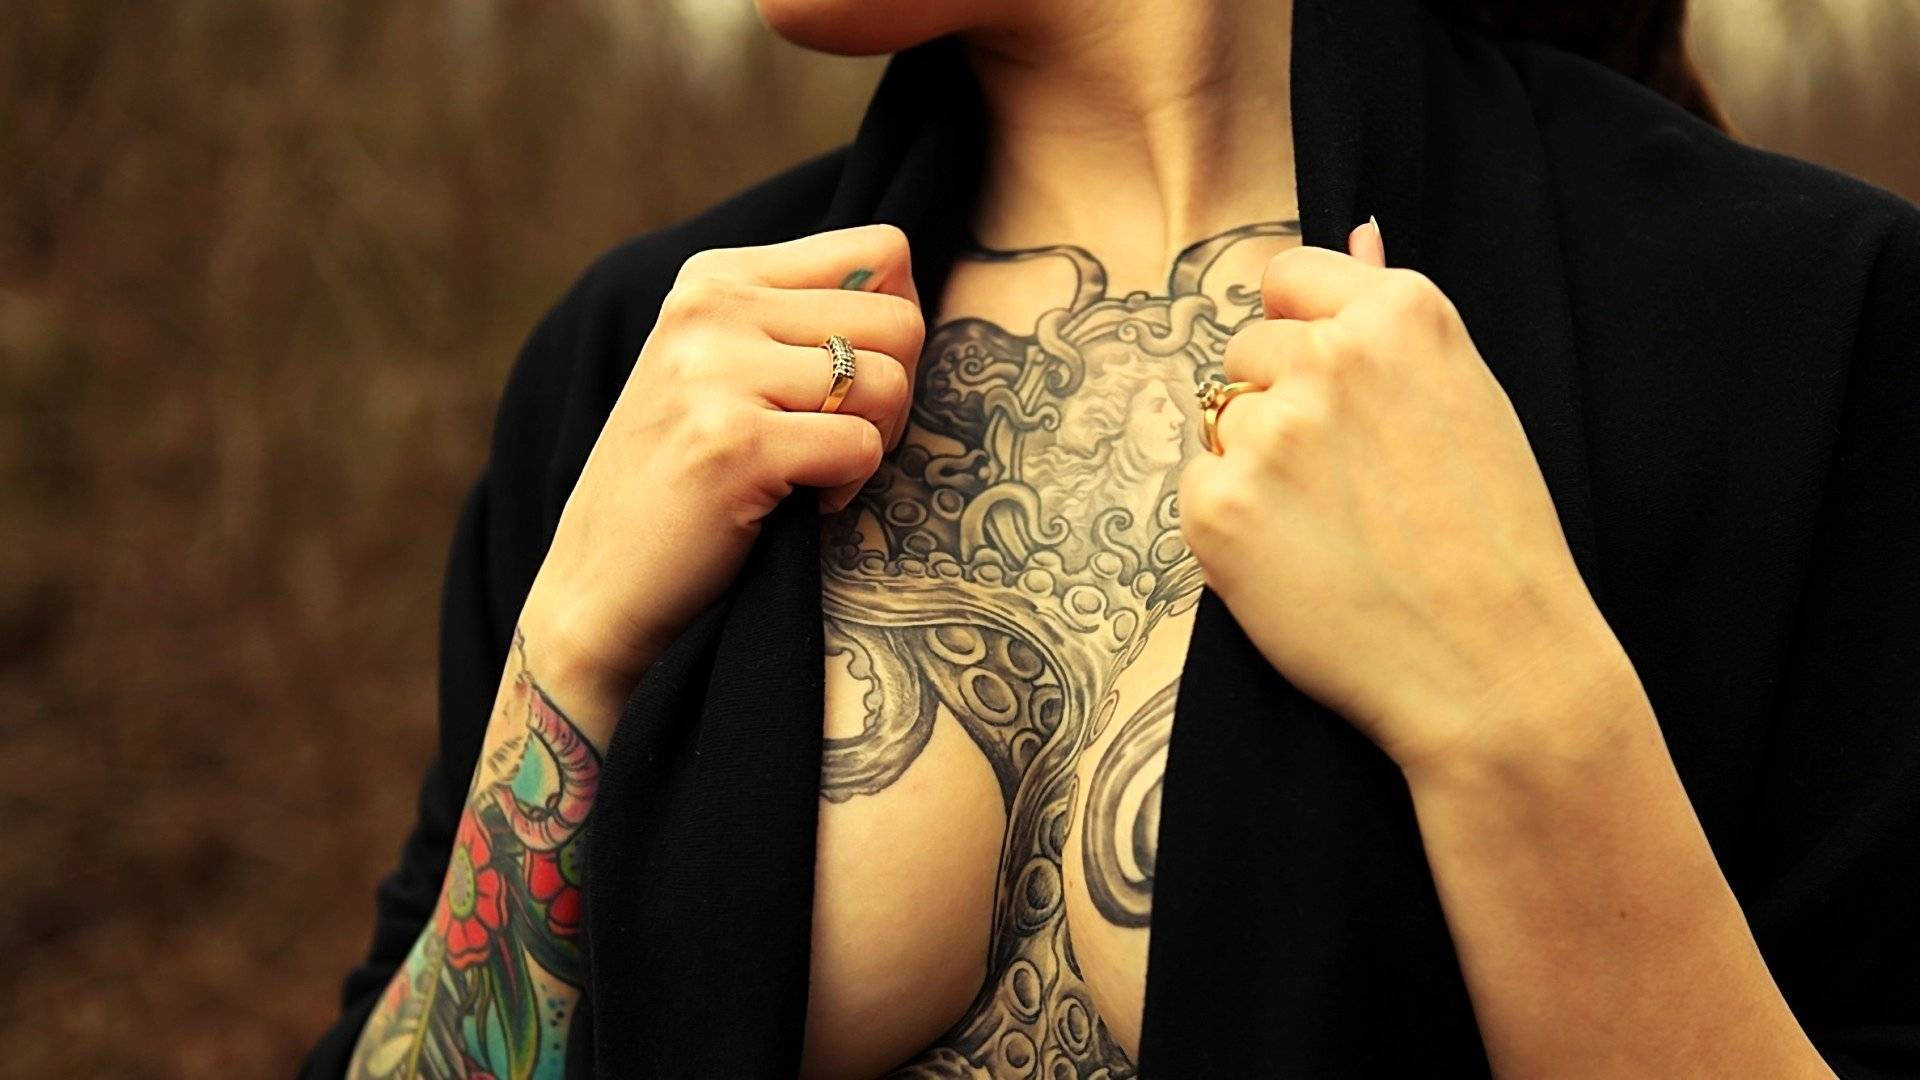 Octopus Chest Tattoo Background